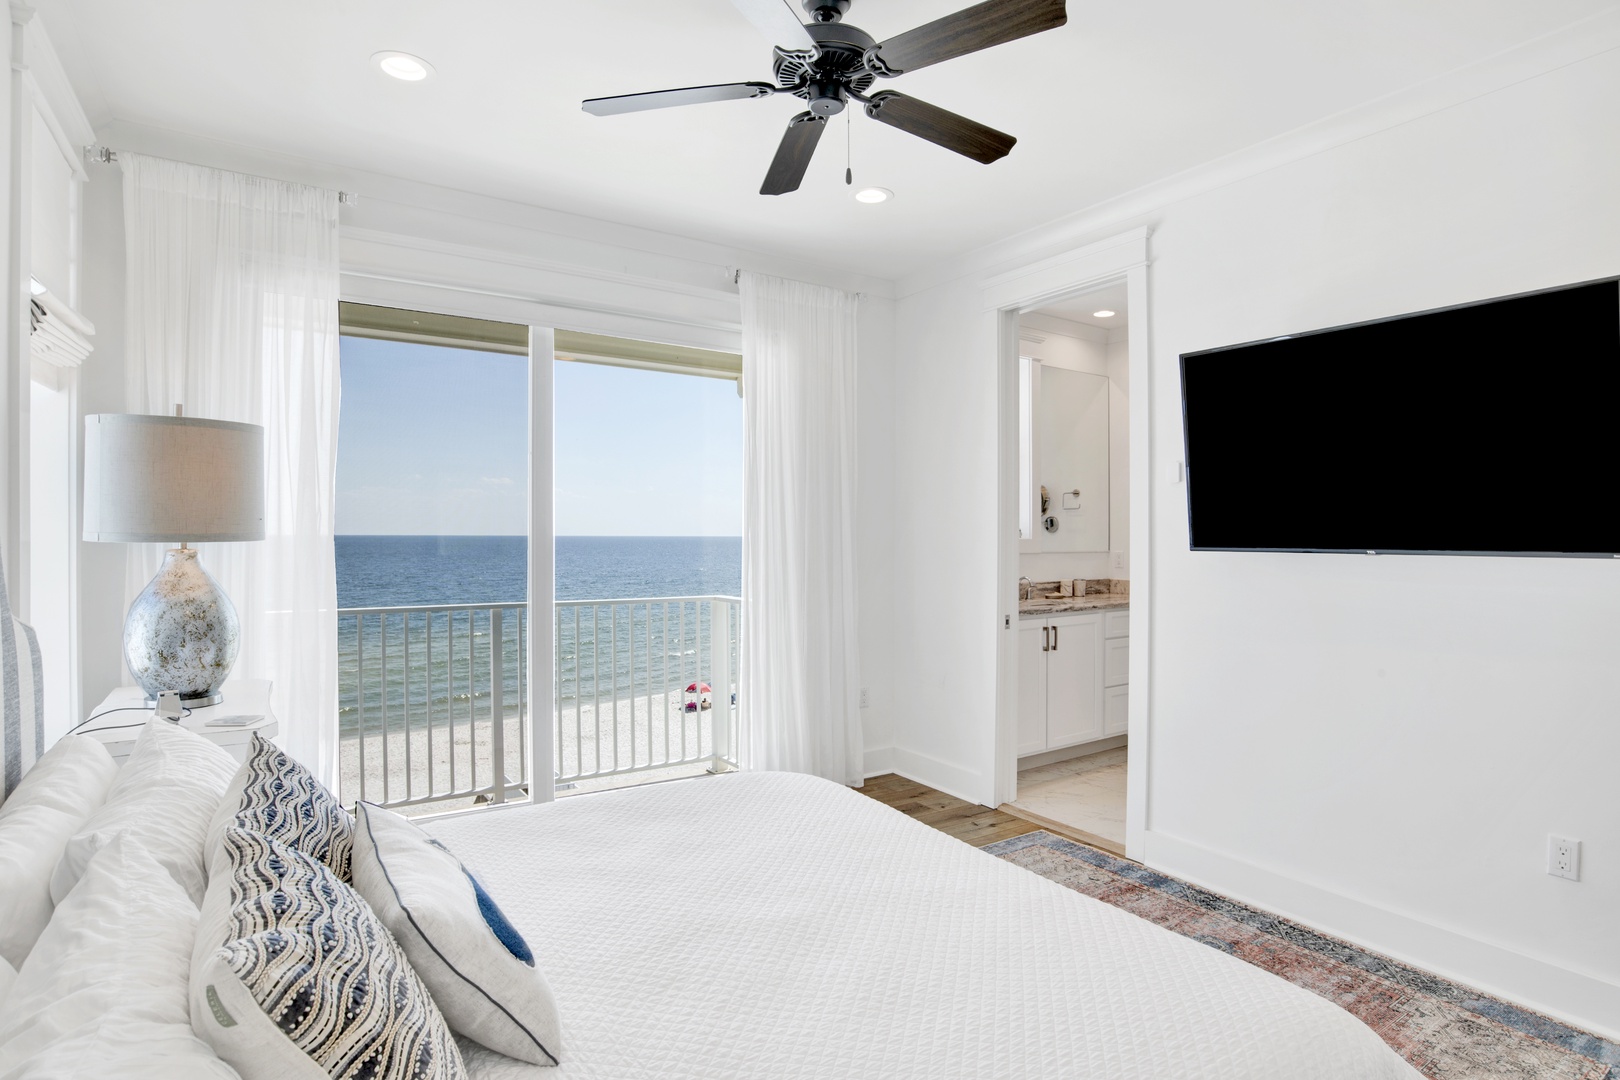 Bedroom 5 features Gulf views, private balcony, TV and a private bathroom